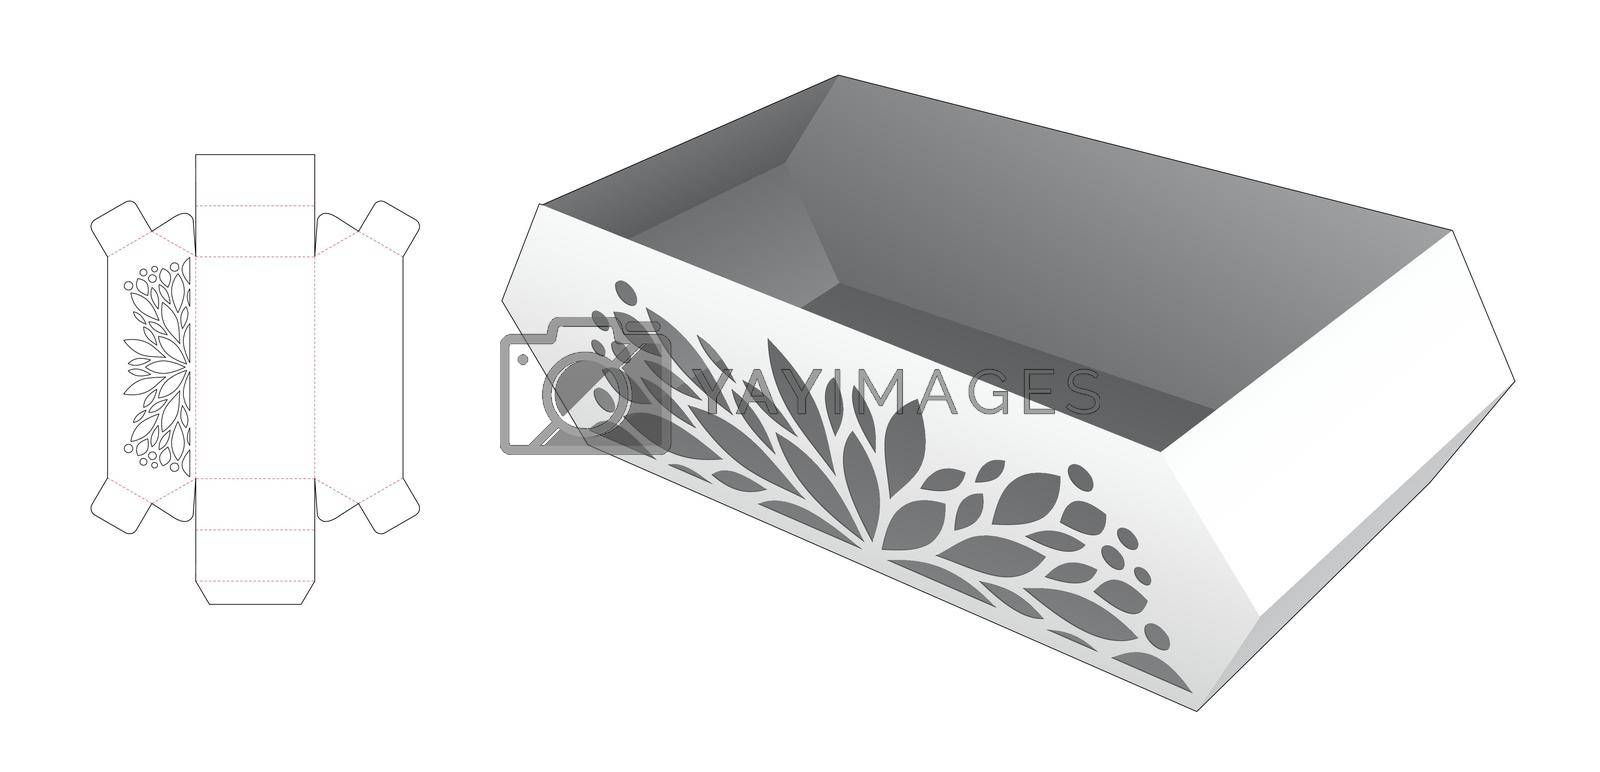 Royalty free image of Chamfered tray with stenciled pattern die cut template and 3D mockup by valueinvestor